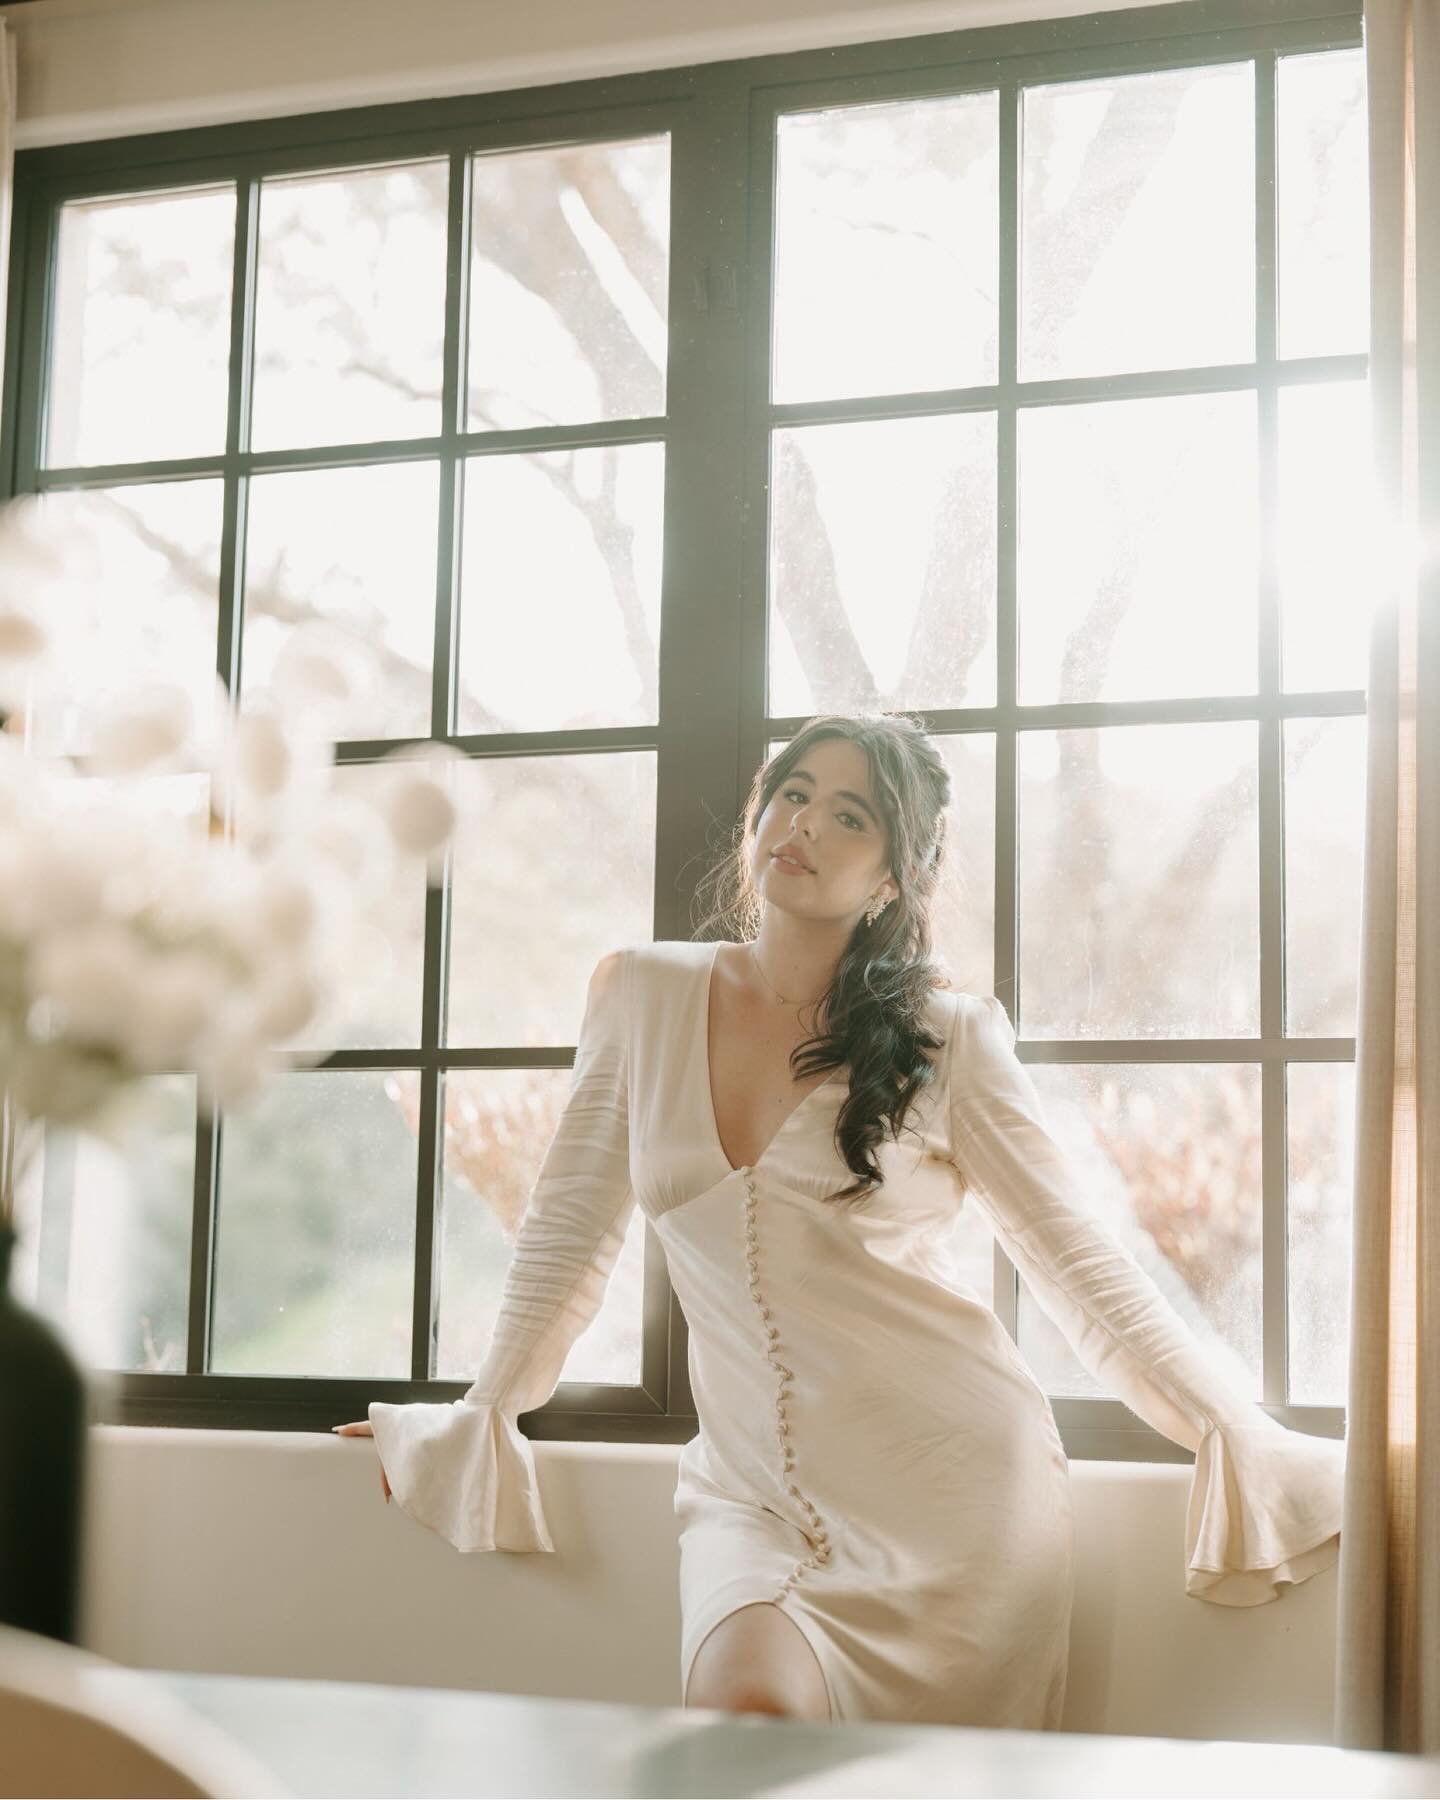 Brides, the cheat code to achieving the best getting ready photos is natural light. Windows, windows, and more windows ✨